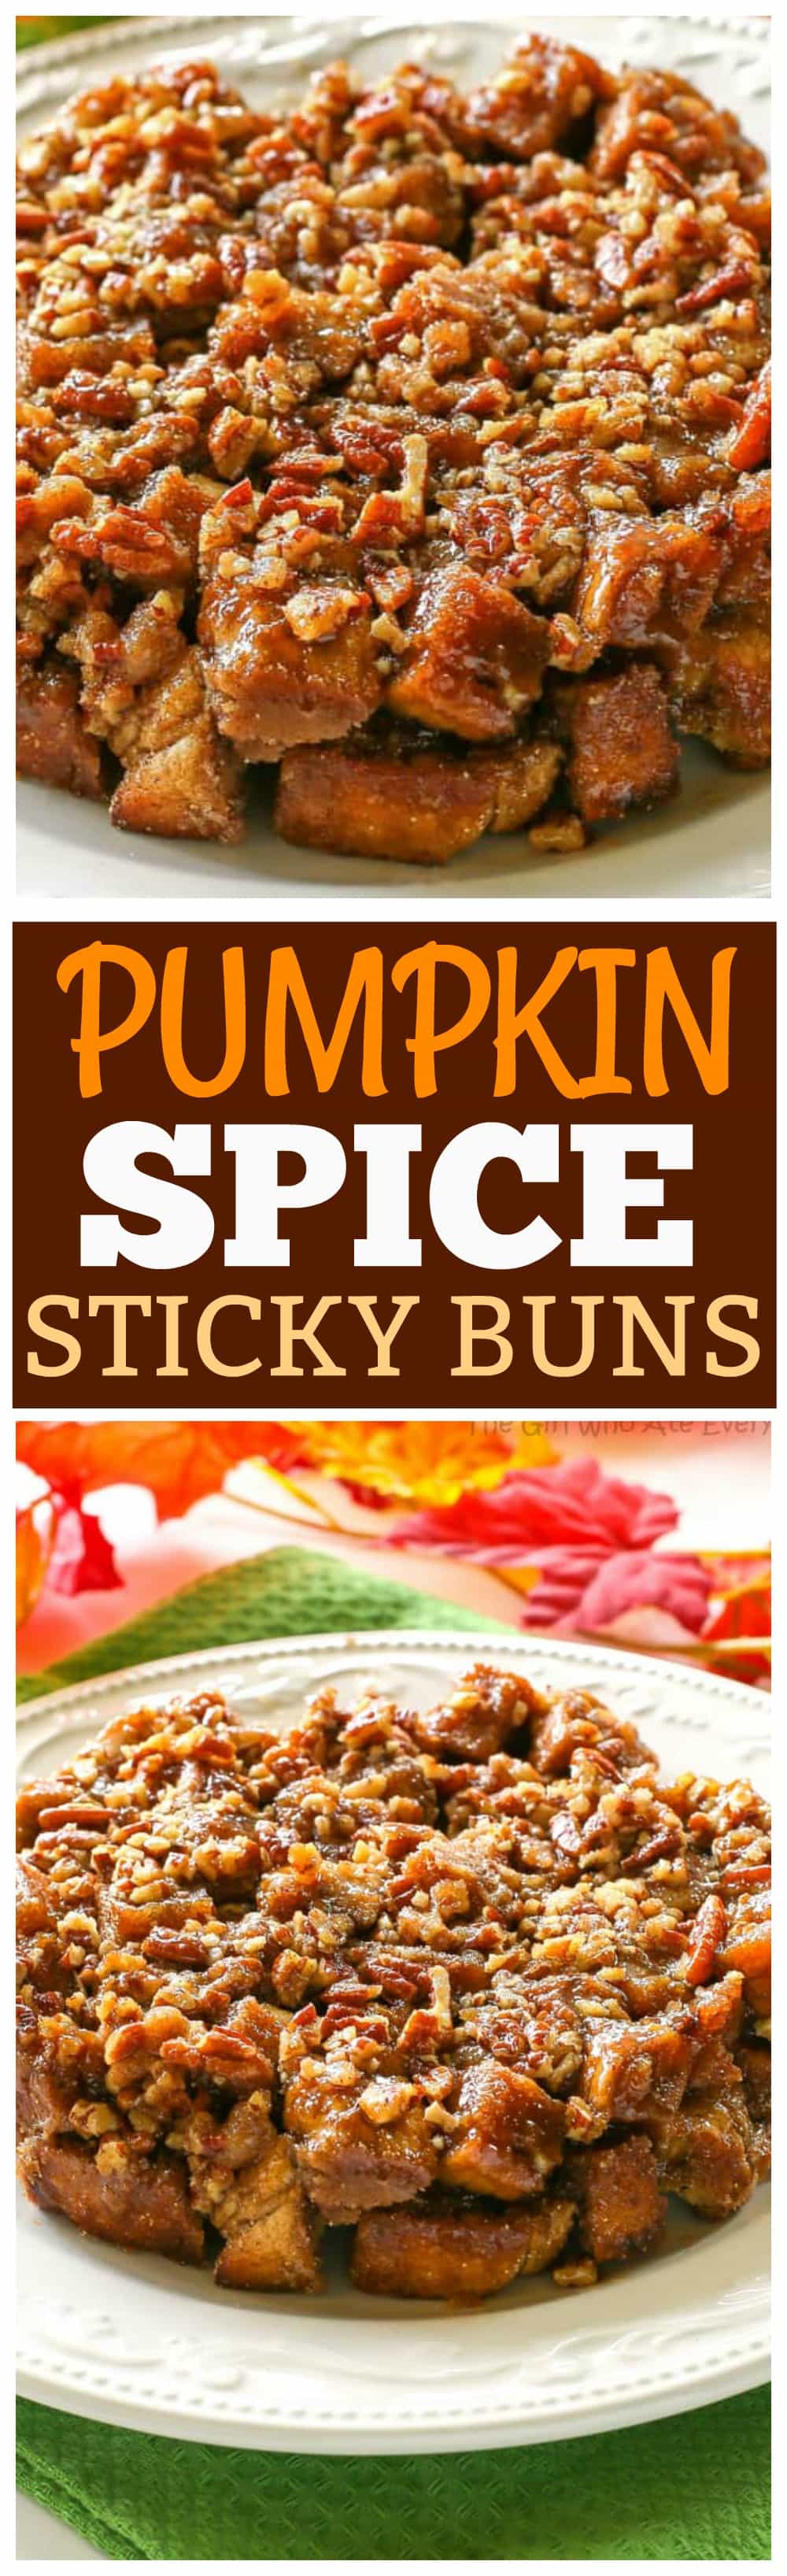 Pumpkin Spice Sticky Buns - they taste like fall and use a shortcut to these tasty buns. the-girl-who-ate-everything.com